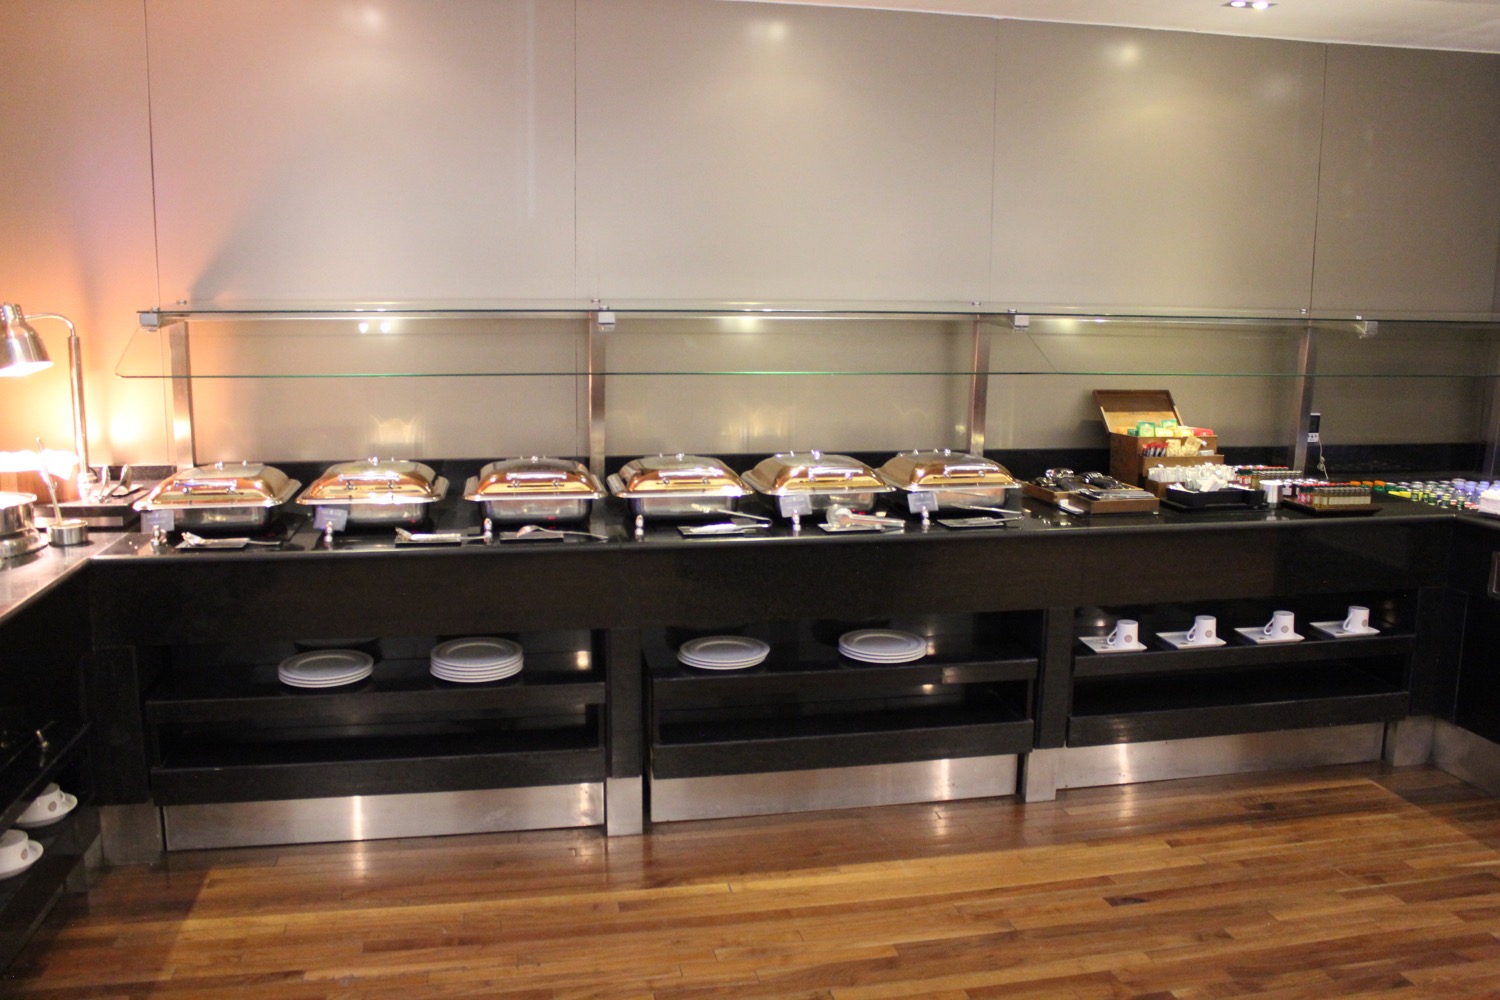 a buffet line with trays of food